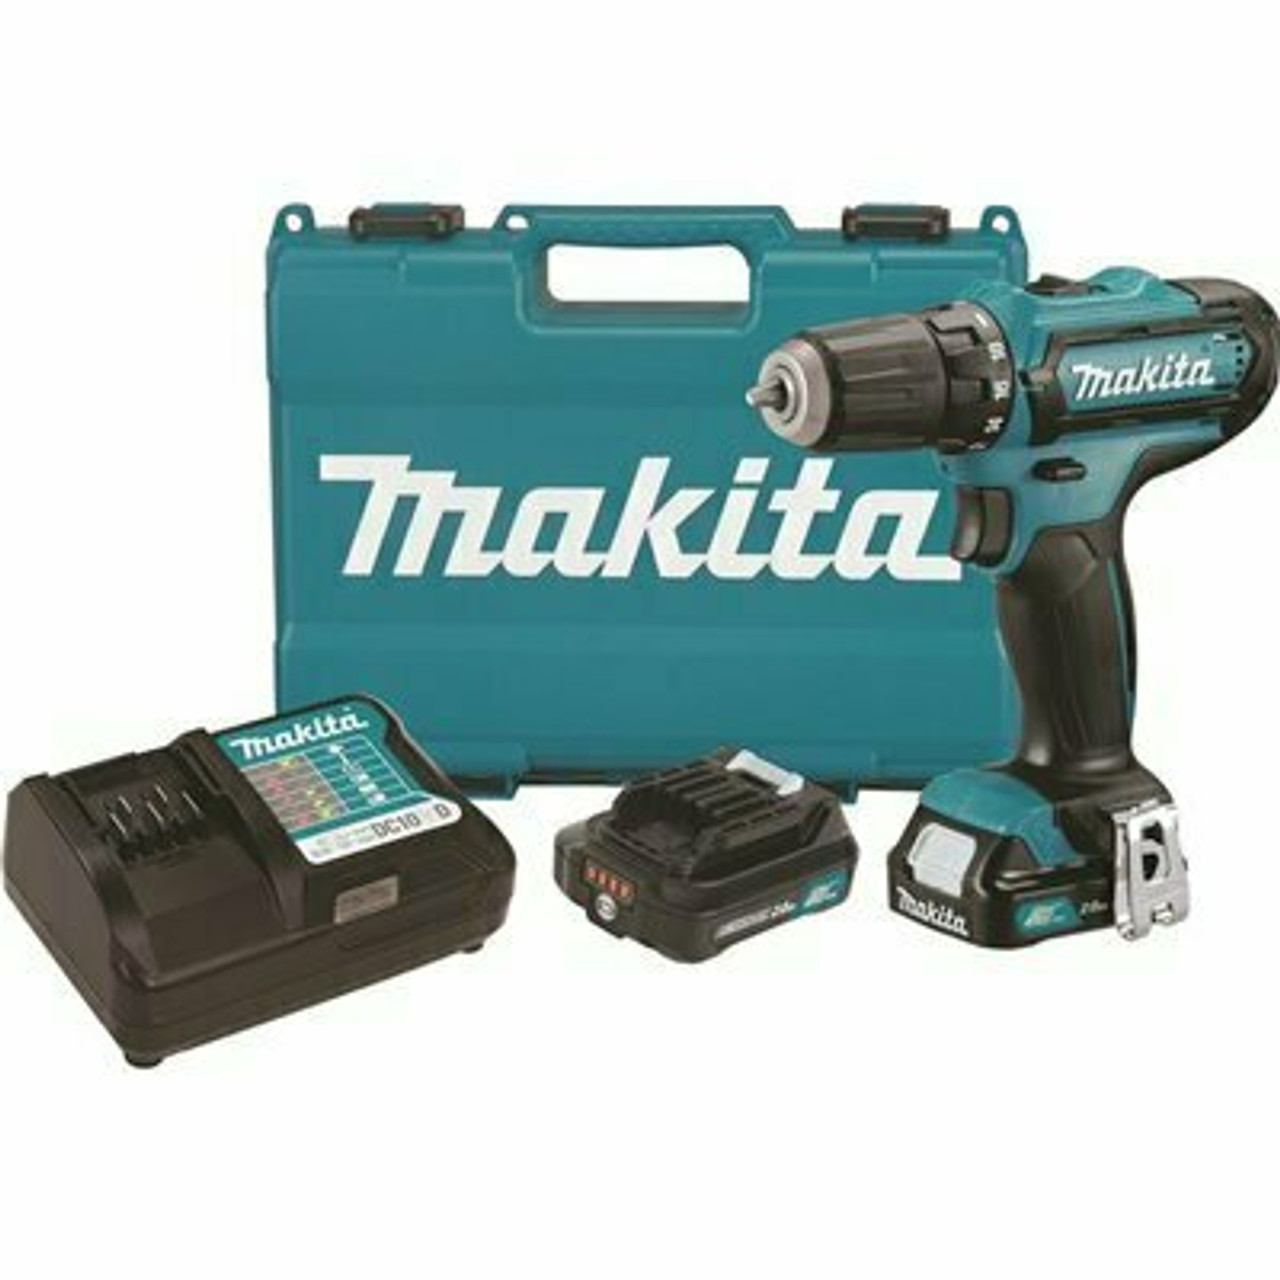 Makita 12-Volt Max Cxt Lithium-Ion Cordless 3/8 In. Driver Drill Kit With (2) Batteries (2.0 Ah), Charger And Hard Case